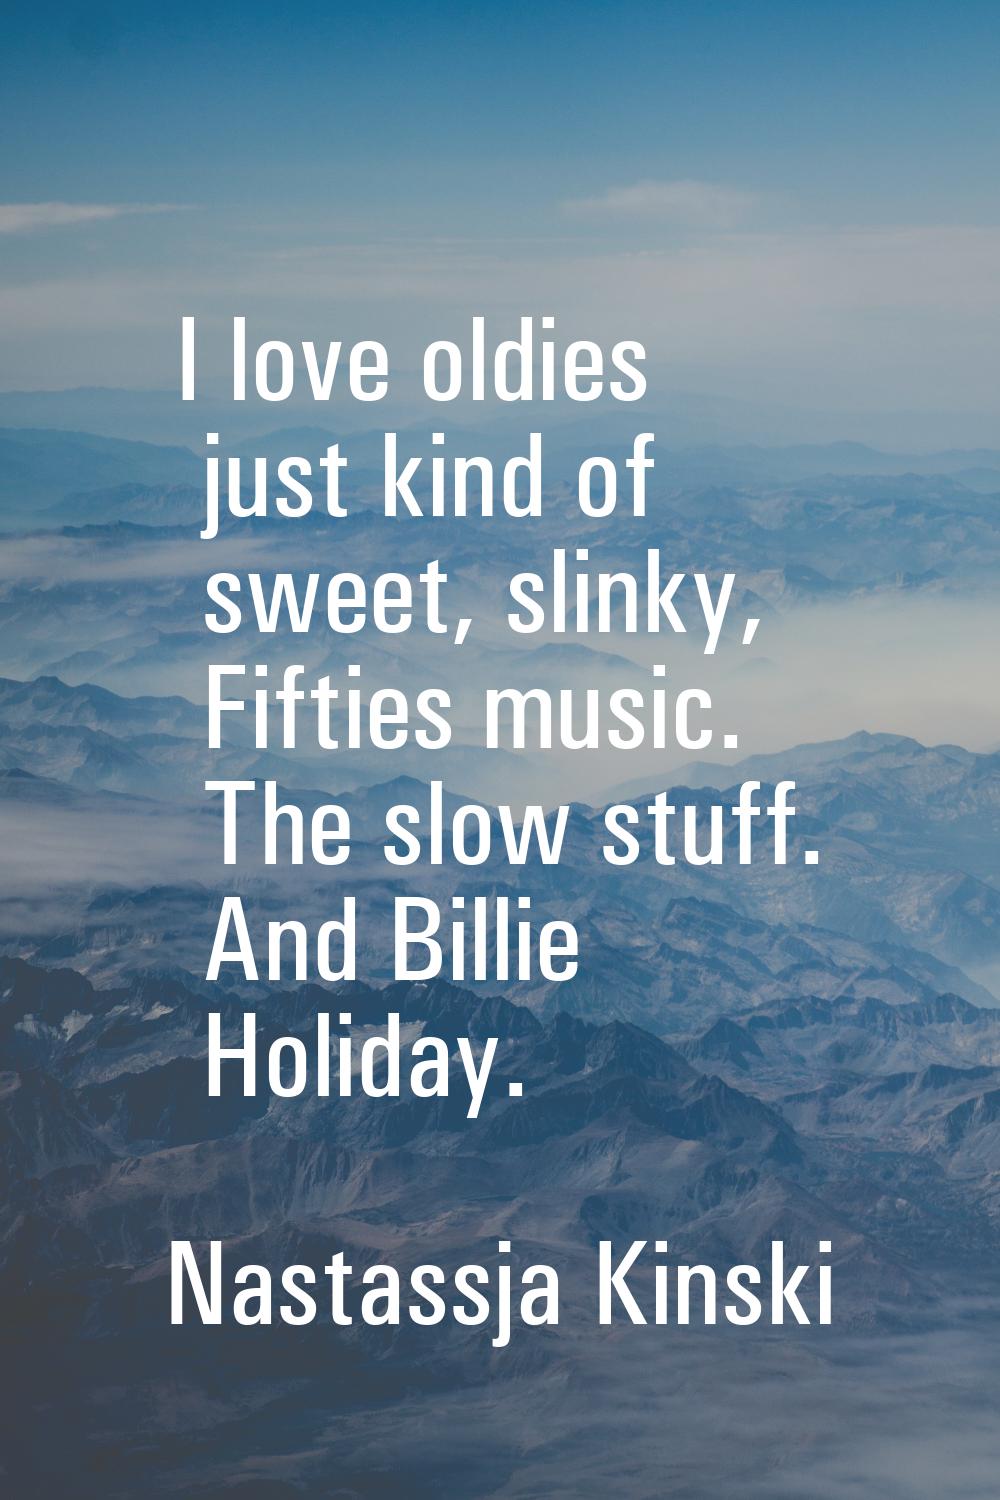 I love oldies just kind of sweet, slinky, Fifties music. The slow stuff. And Billie Holiday.